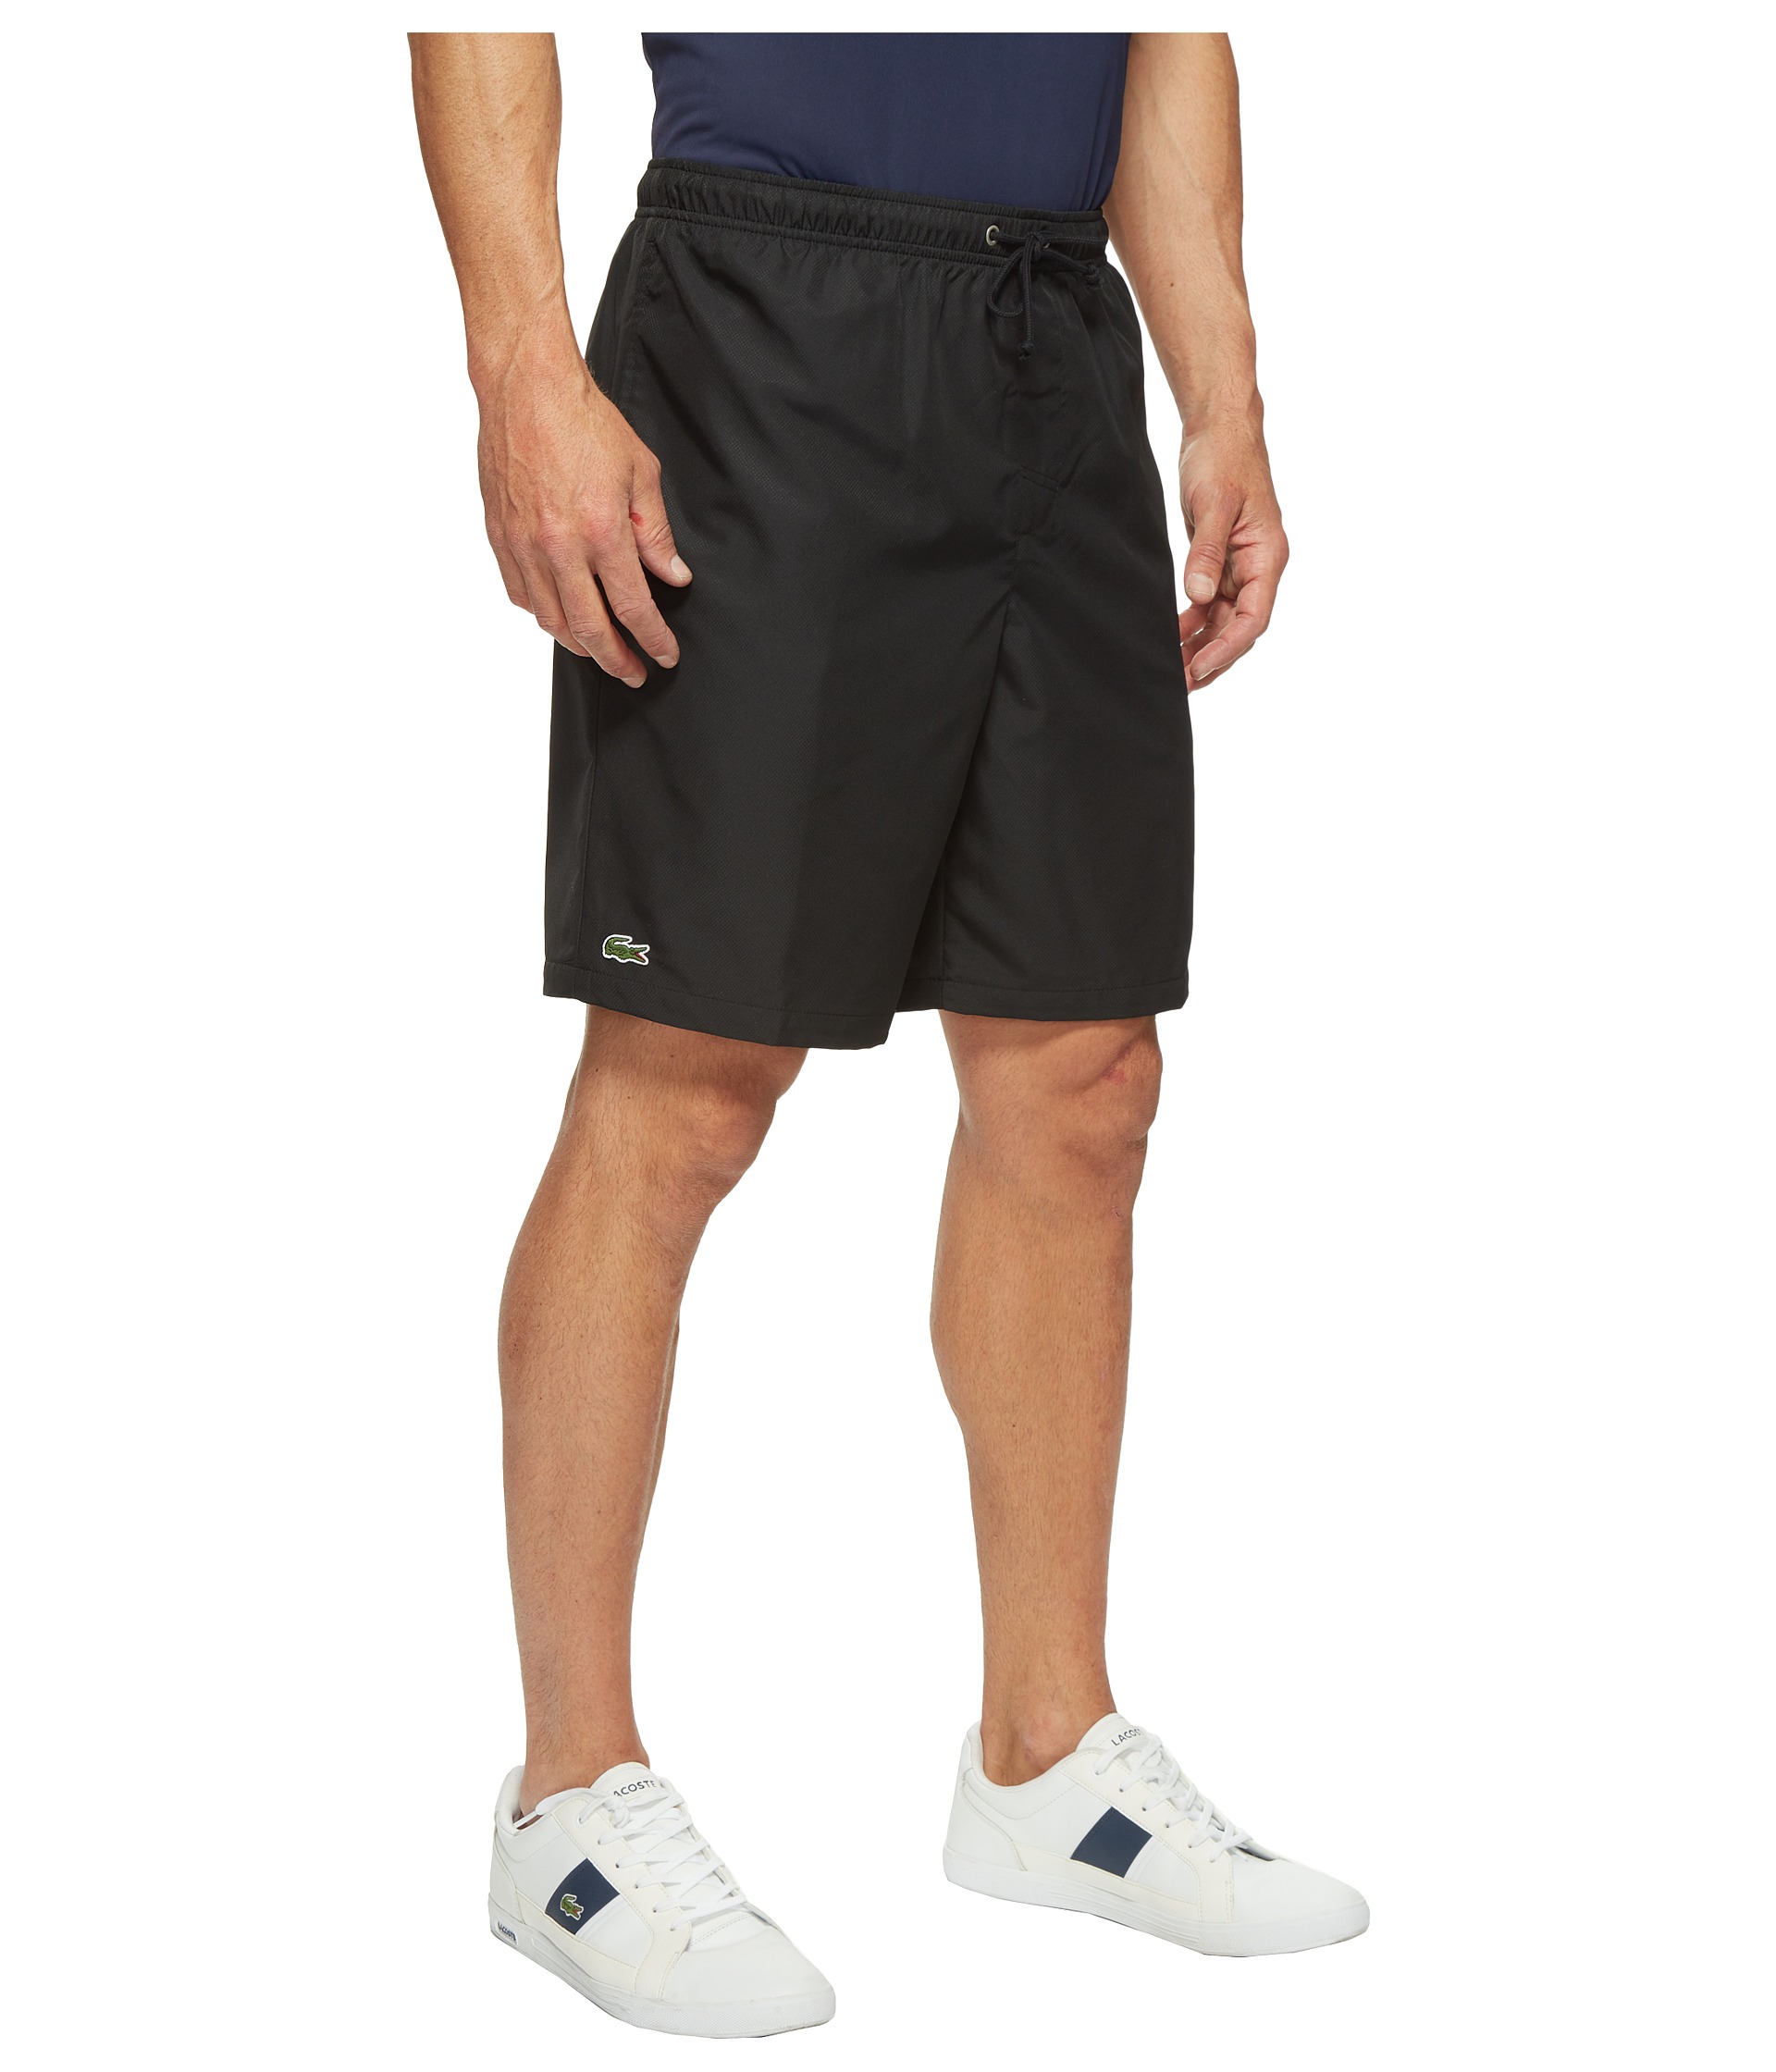 Lacoste Sport Lined Tennis Shorts - Zappos.com Free Shipping BOTH Ways